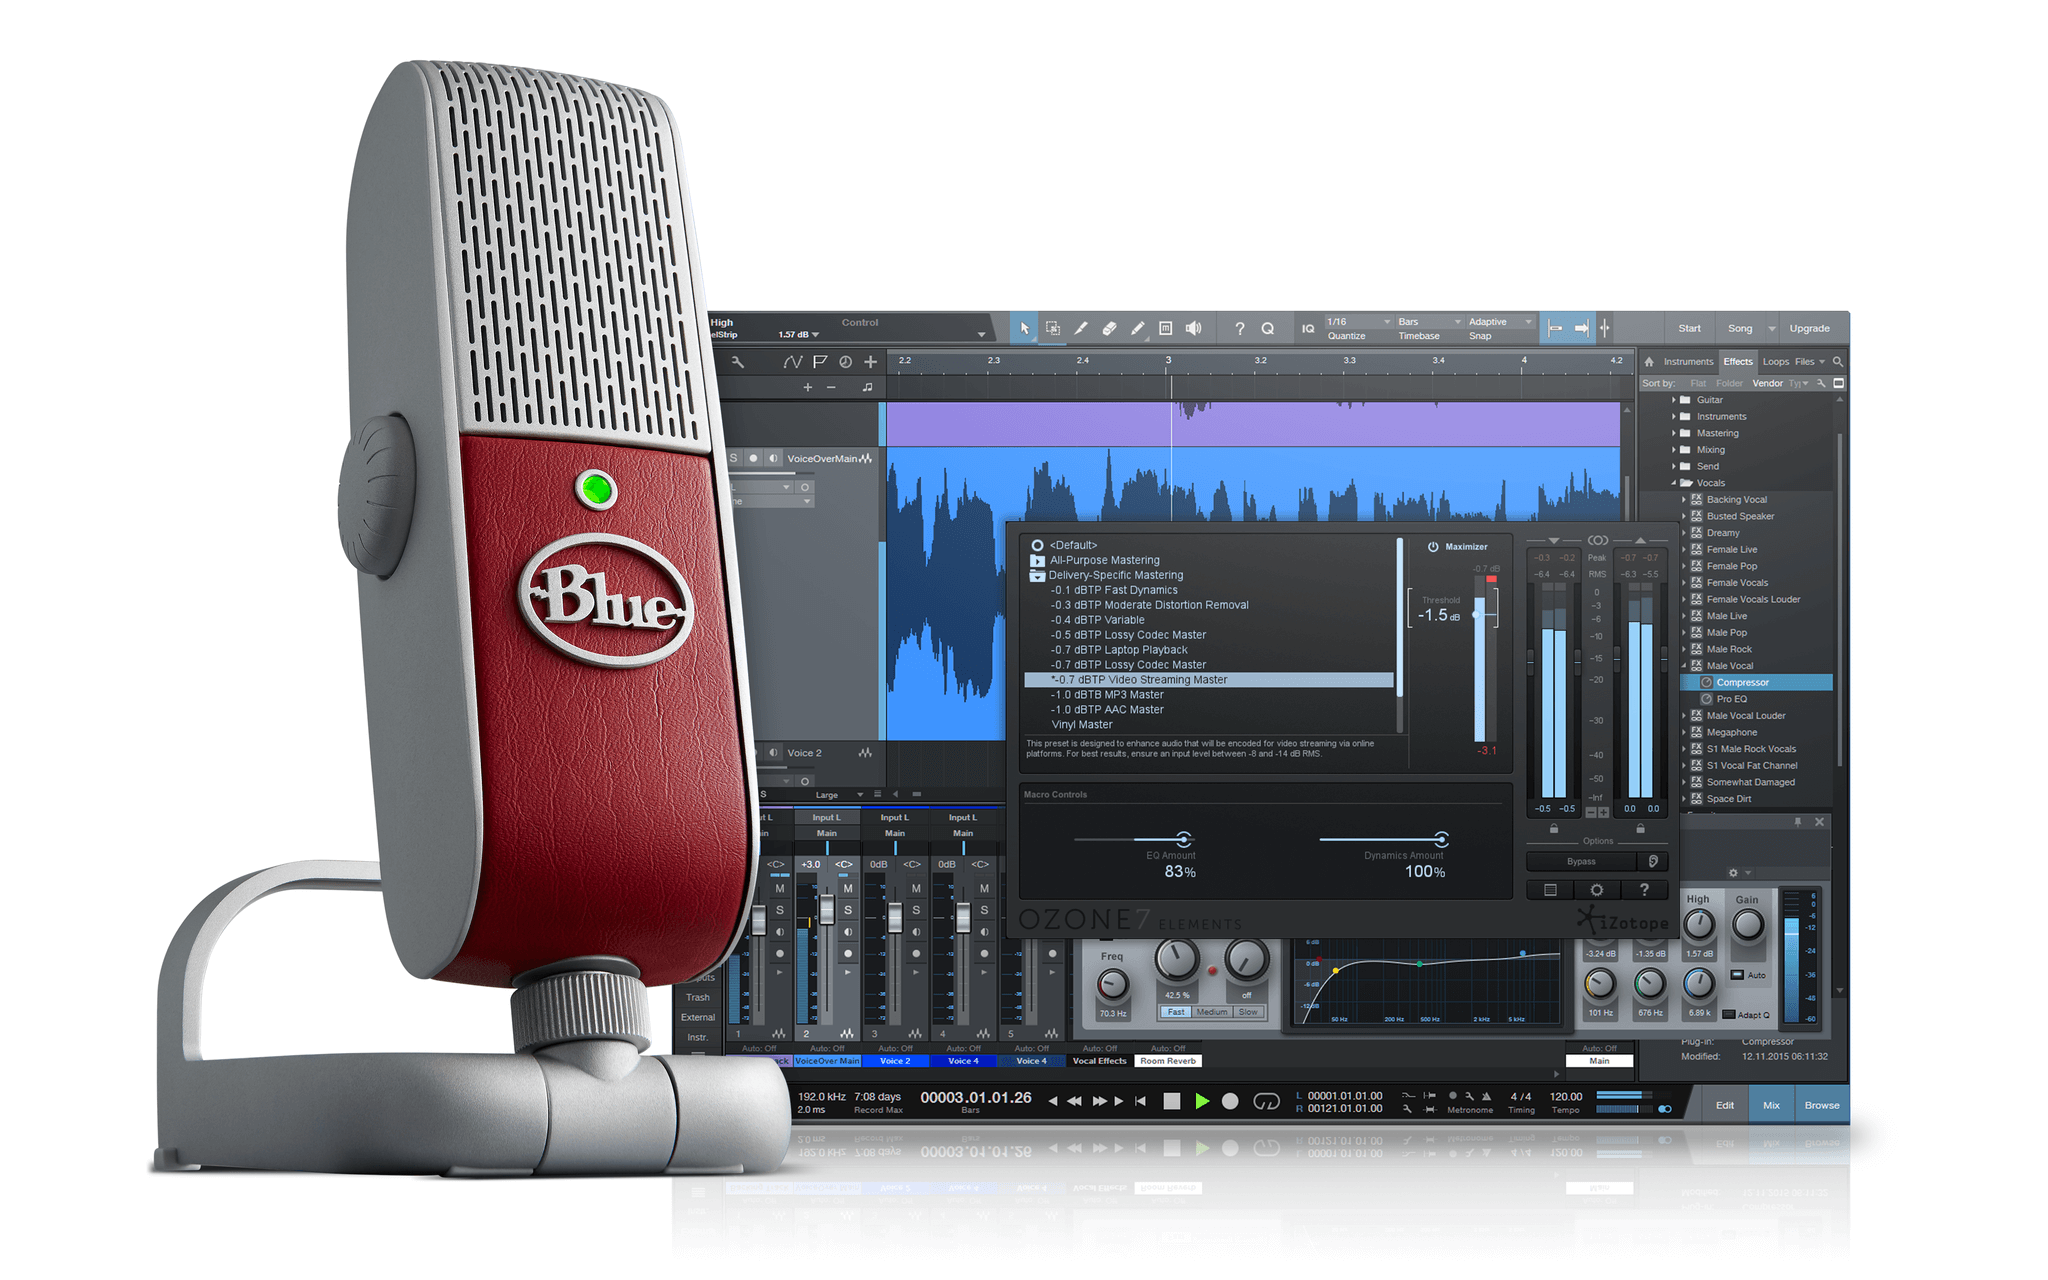 Blue Introduces the Raspberry Studio All-In-One Mobile Recording System